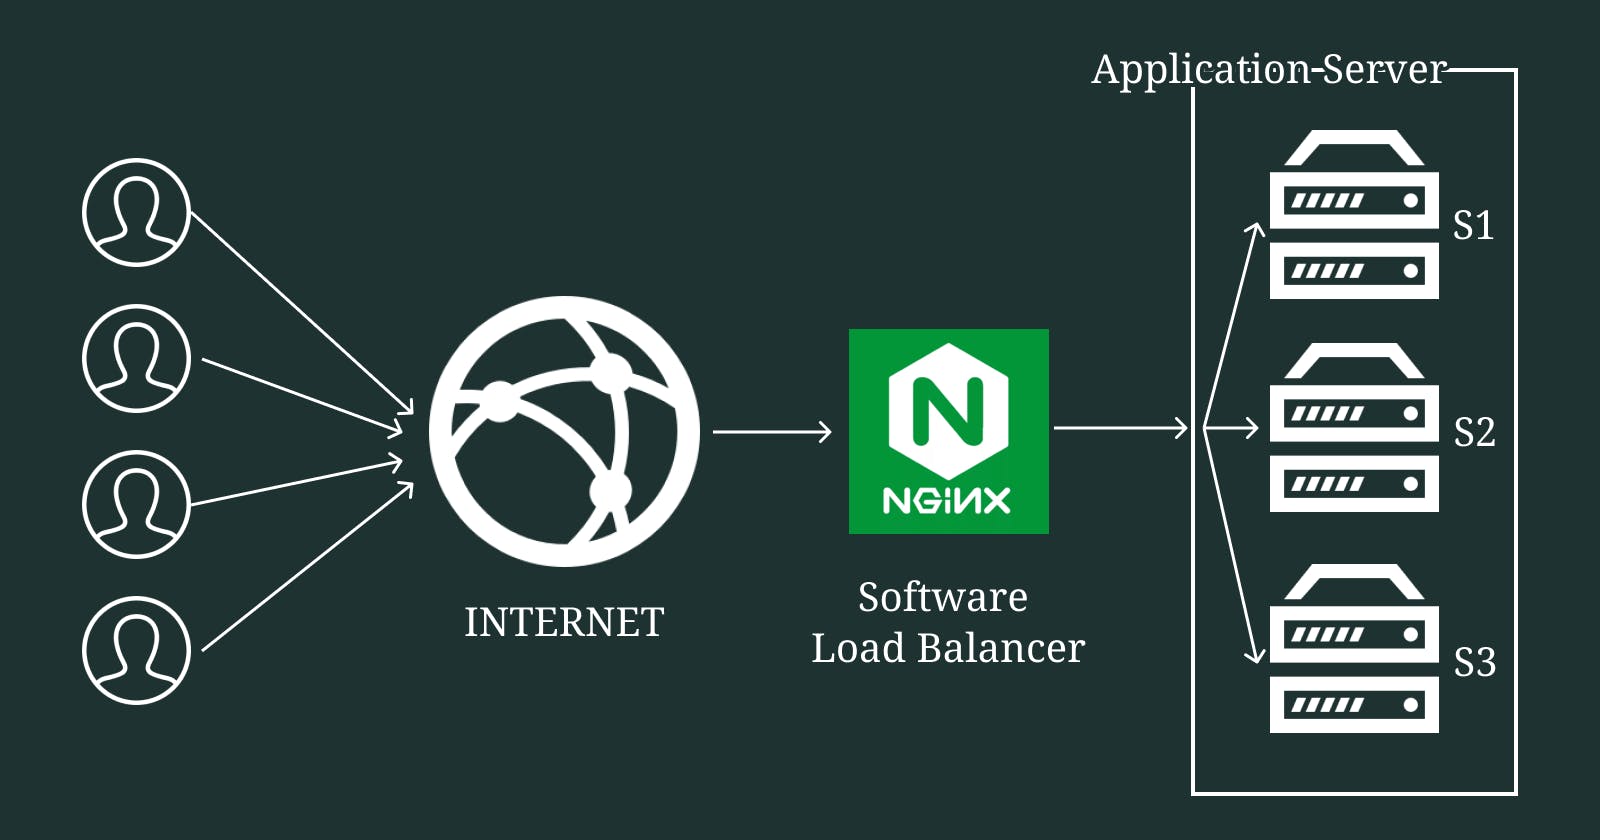 Navigating Nginx: A Beginner's Guide to Finding and Creating a Basic Web Server